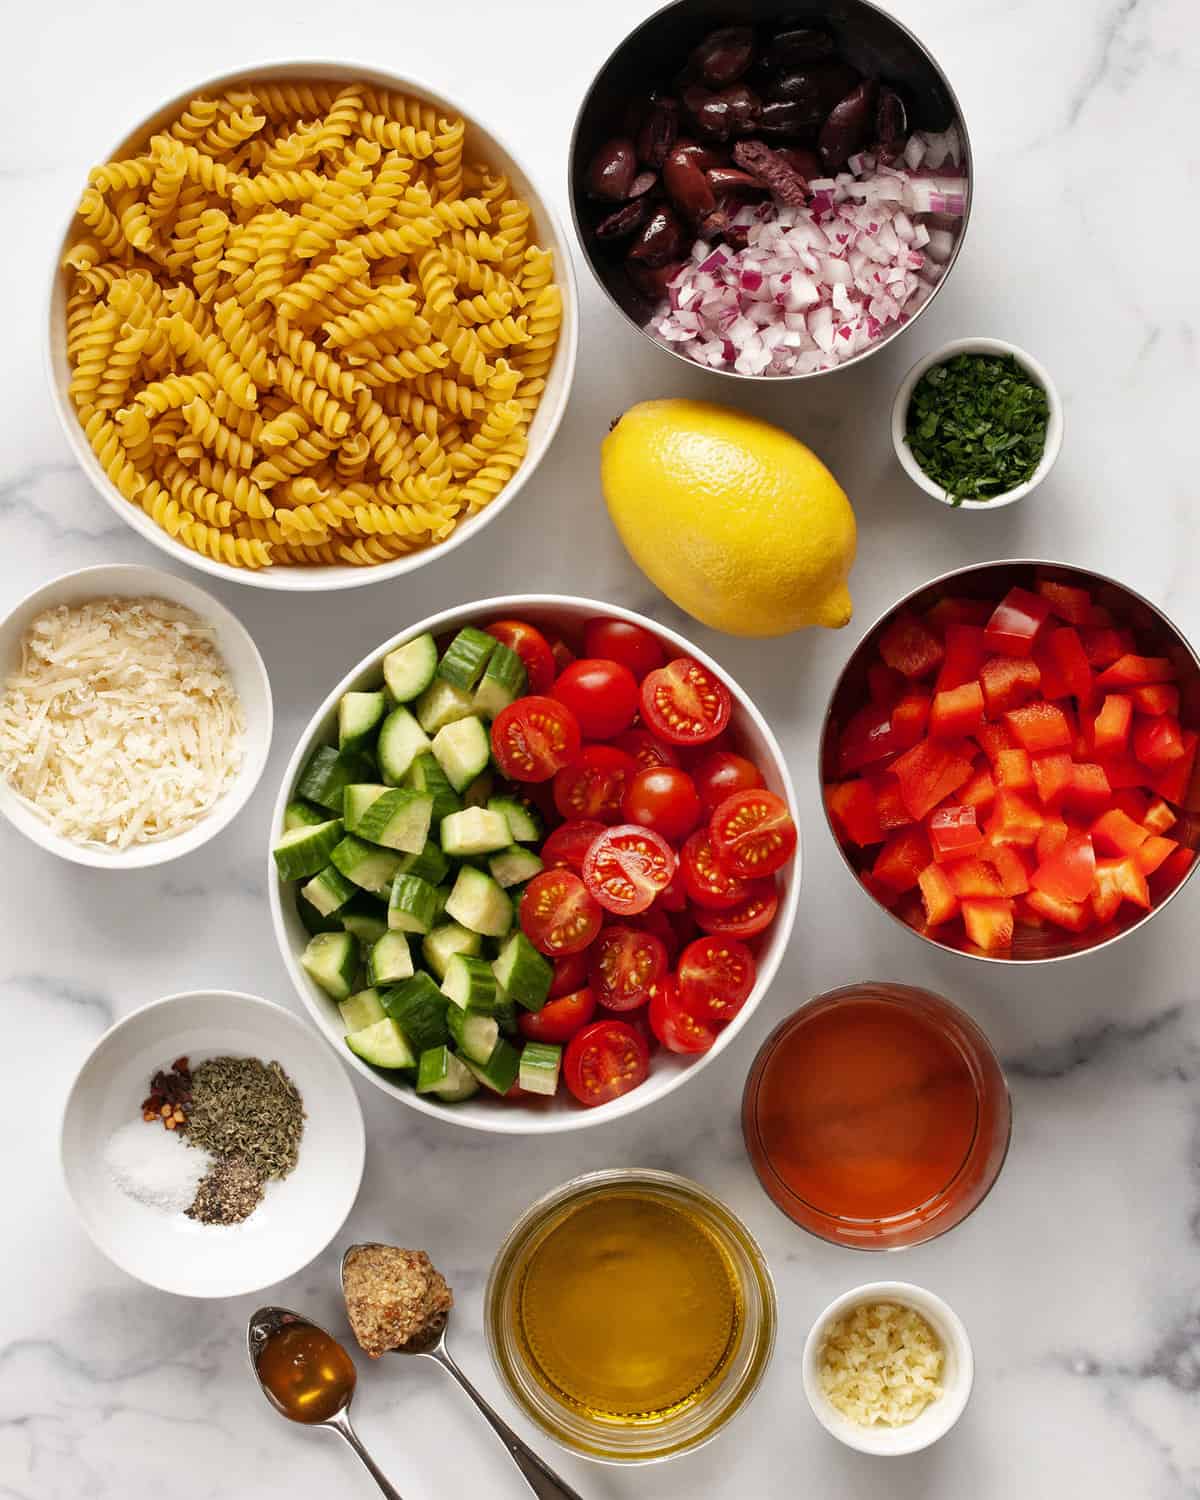 Ingredients including rotini pasta, tomatoes, peppers, cucumbers, onions, olives, vinegar, olive oil, garlic, mustard and spices.